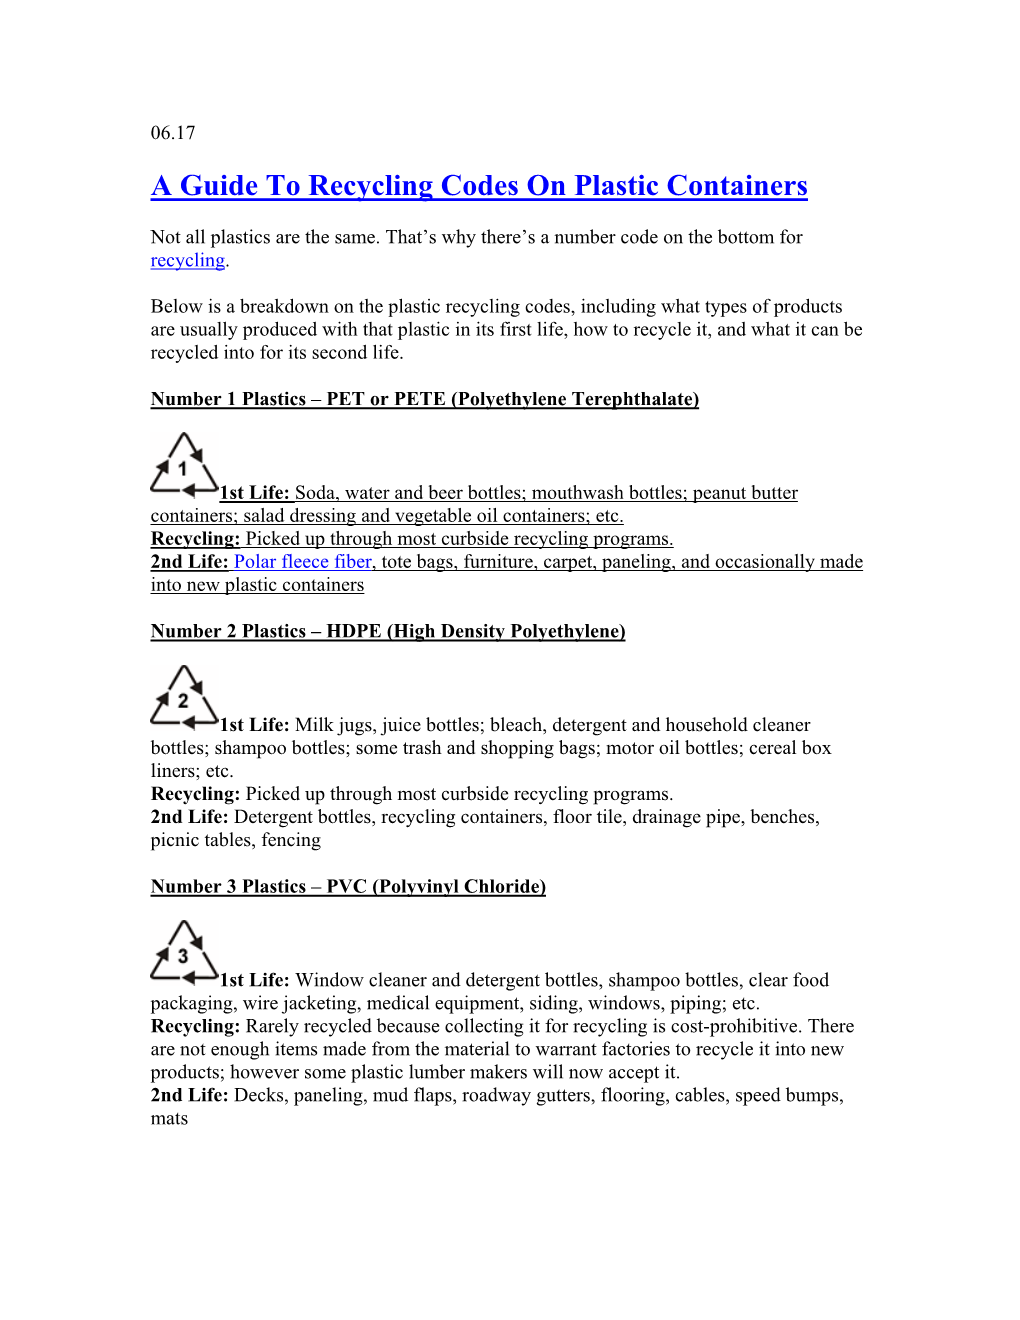 A Guide to Recycling Codes on Plastic Containers